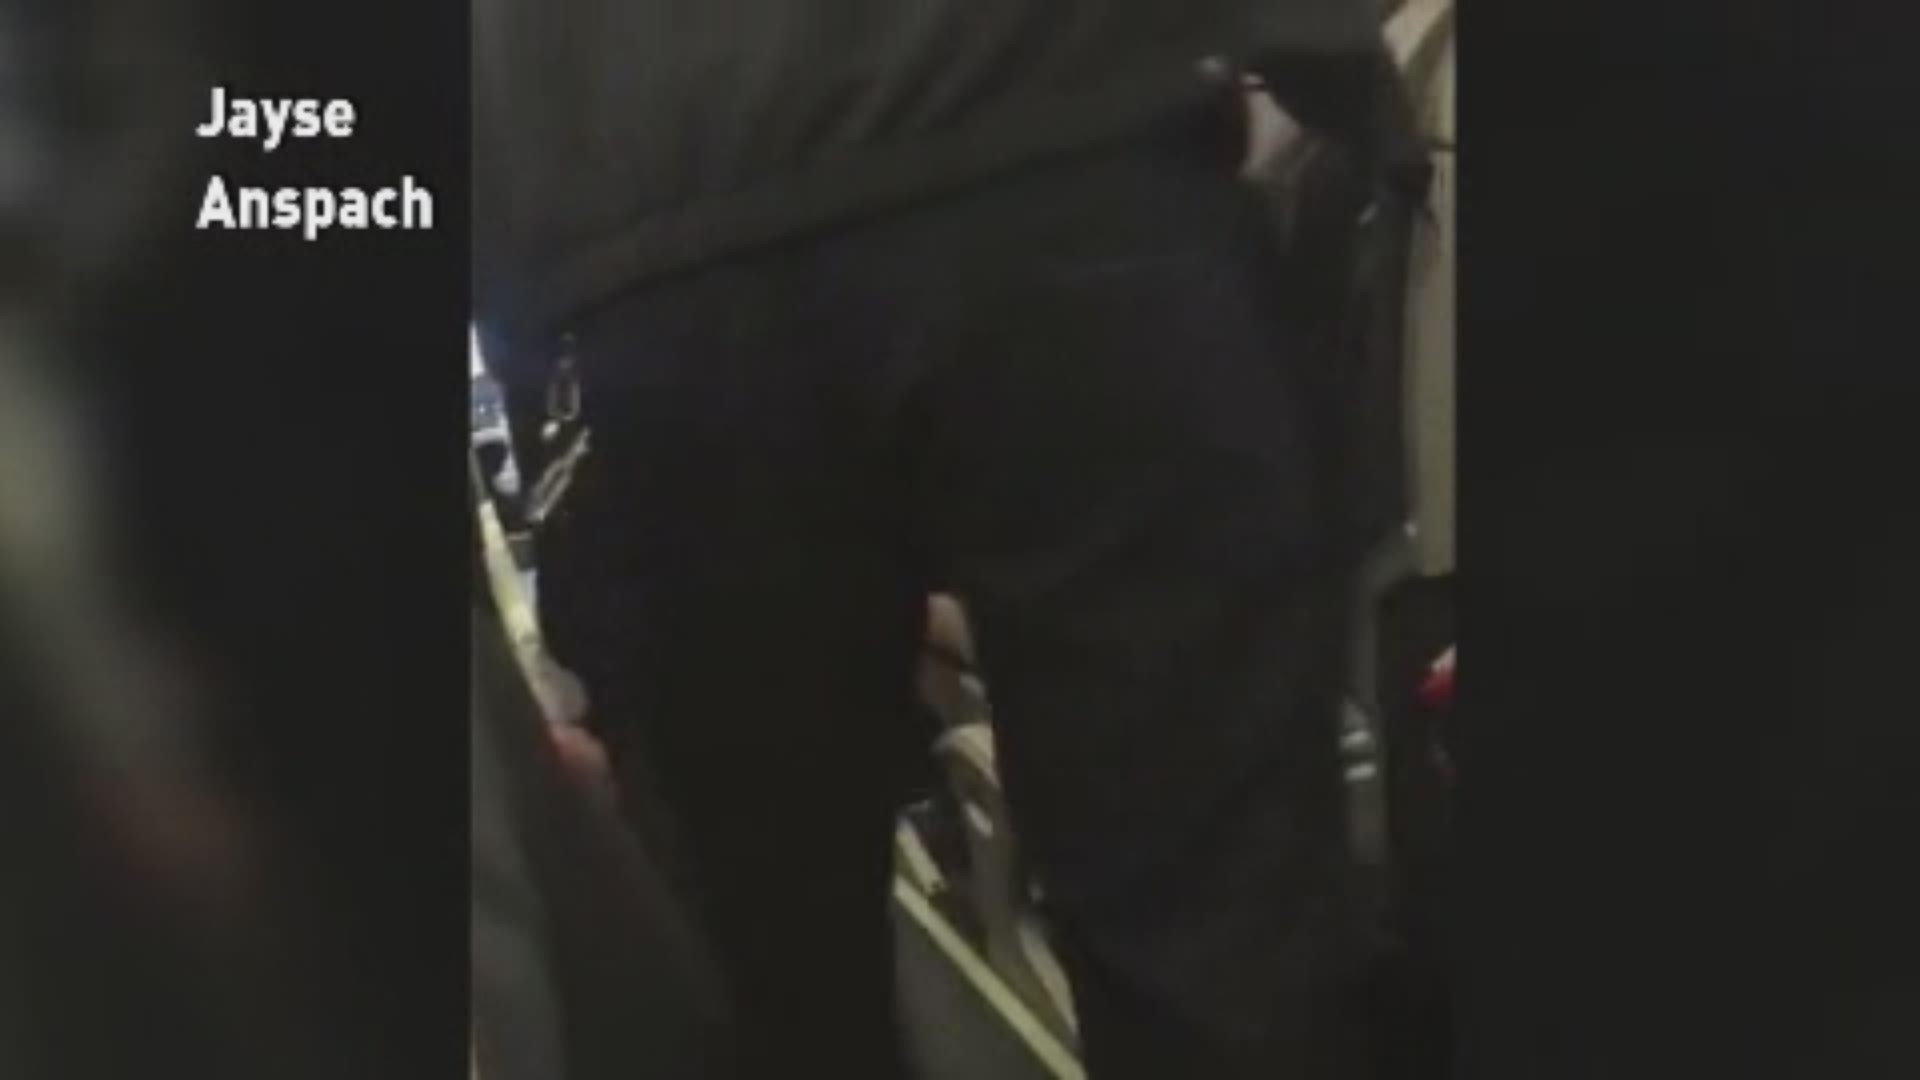 Disturbing footage sent to WHAS11 from viewers shows a man forcefully removed from a United Airlines Flight headed from Chicago to Louisville on April 9.